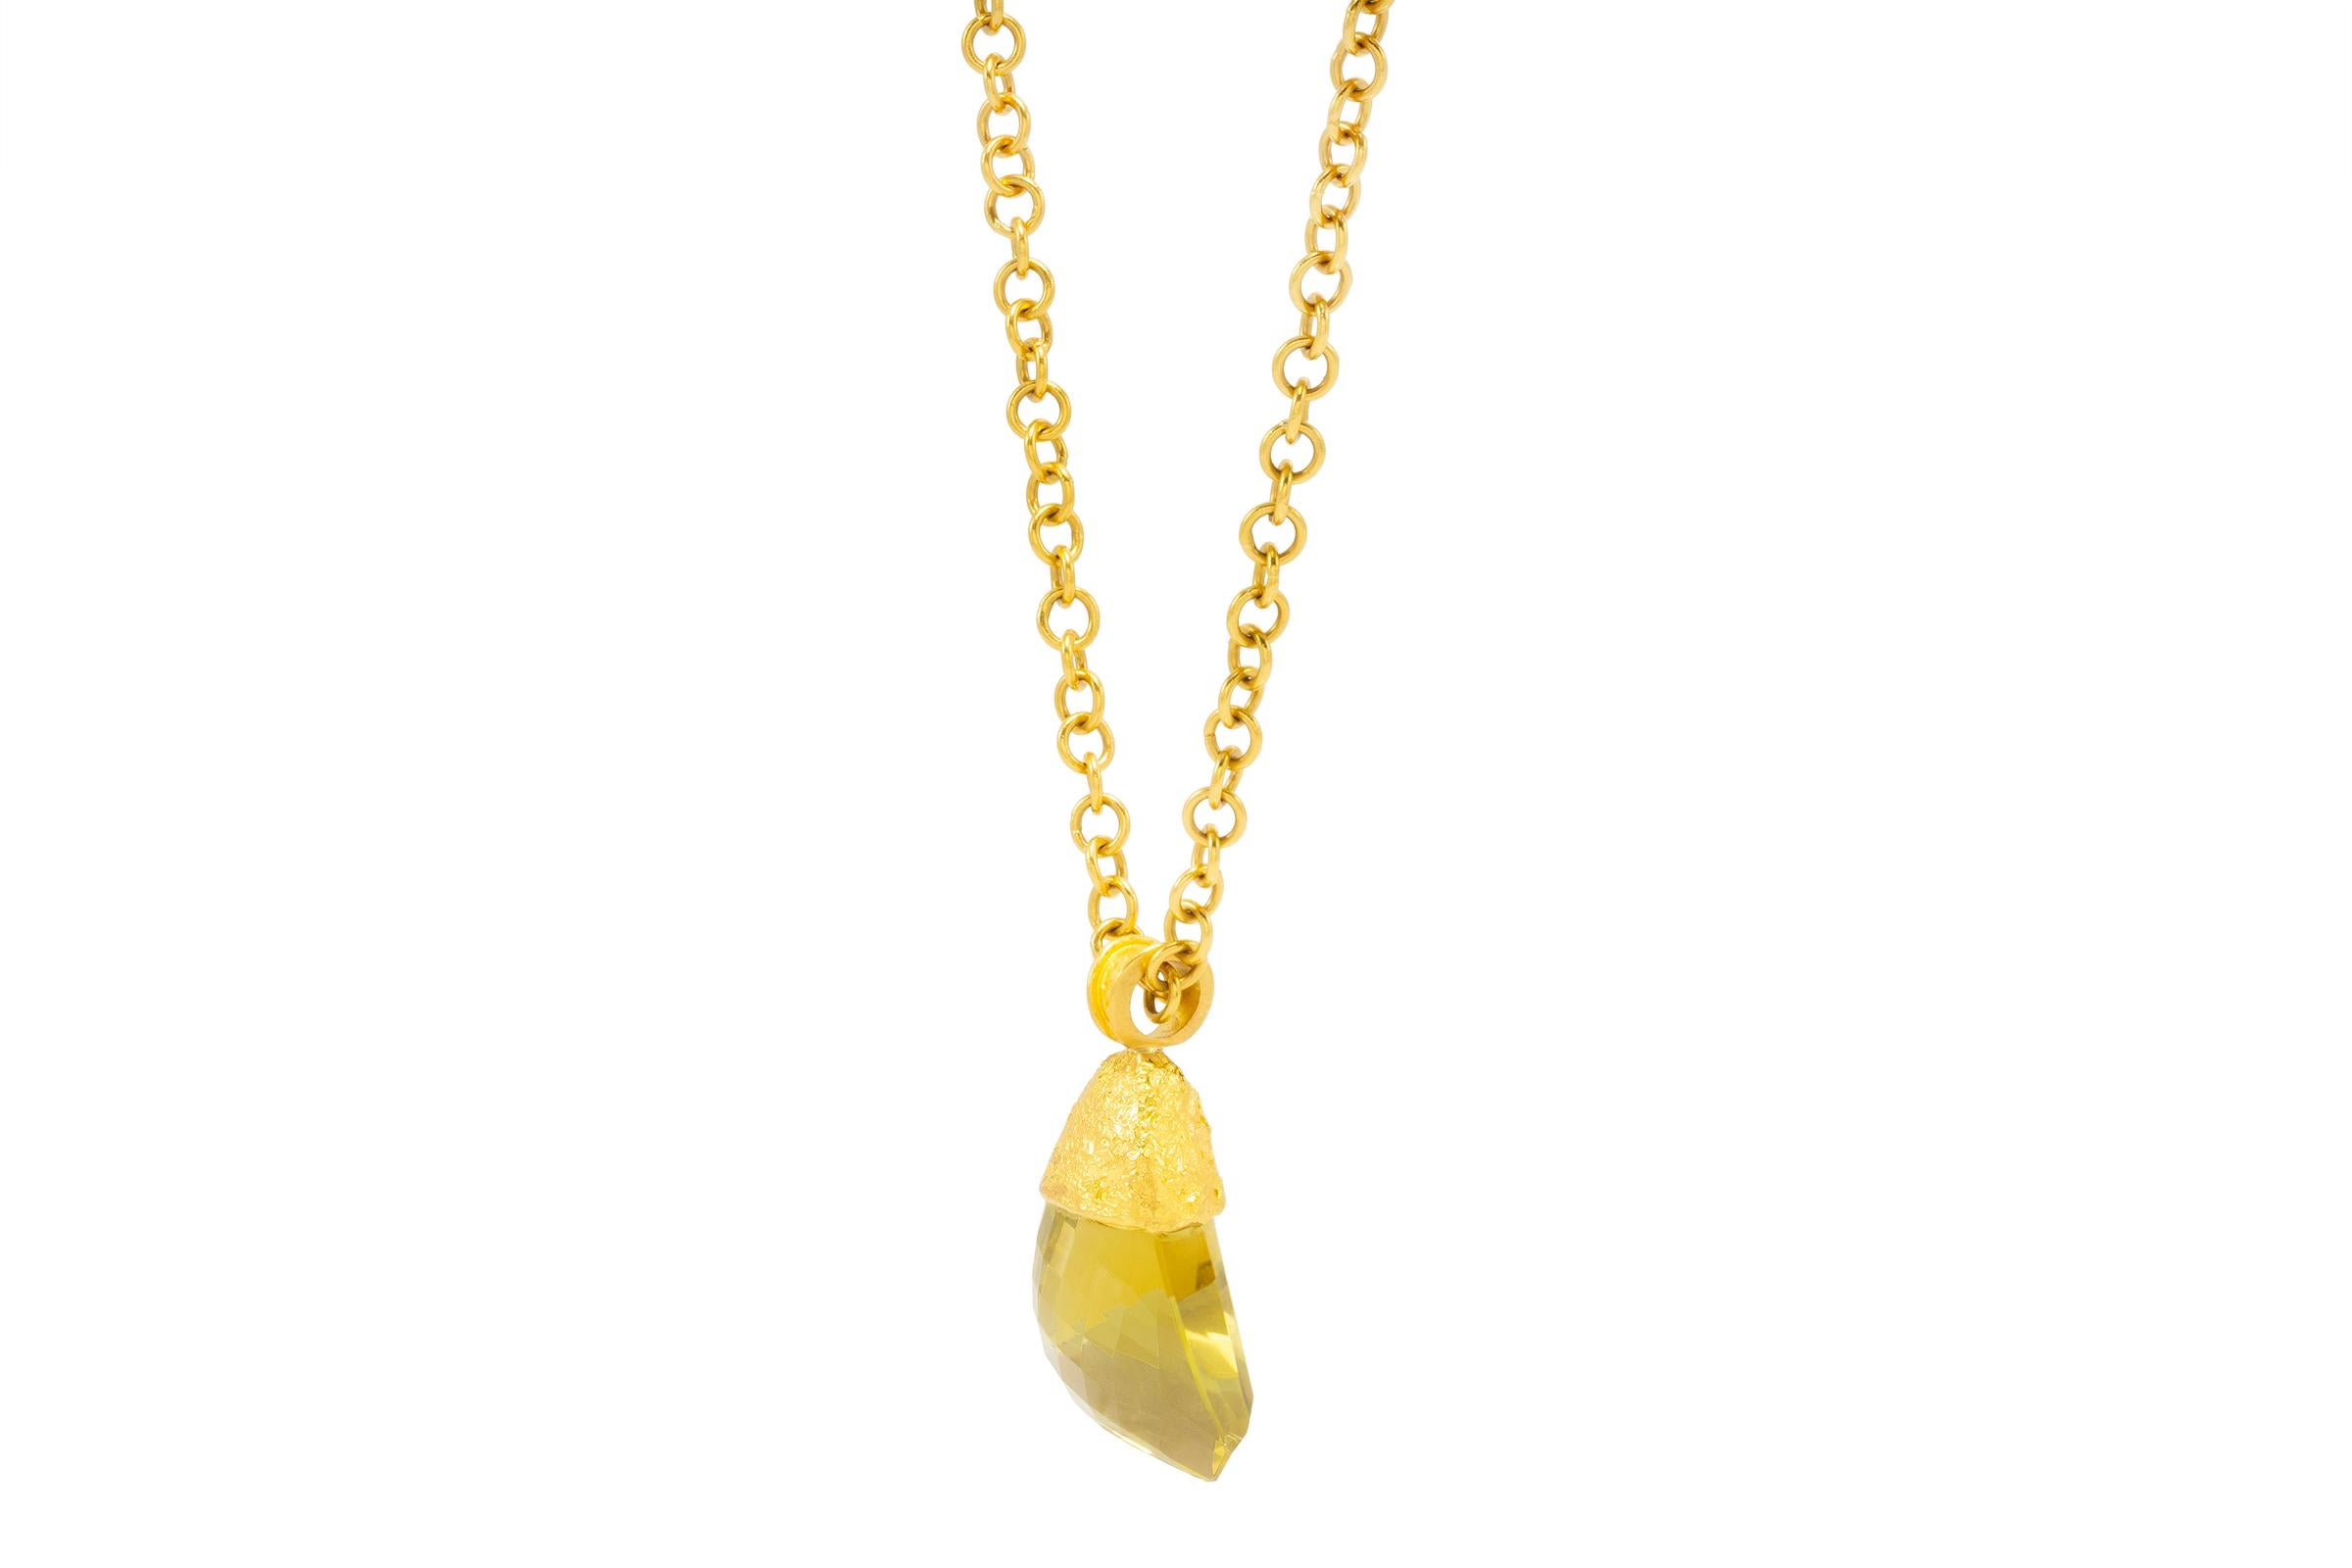 Rough Cut Citrine Pendant in 22k Gold, by Tagili For Sale